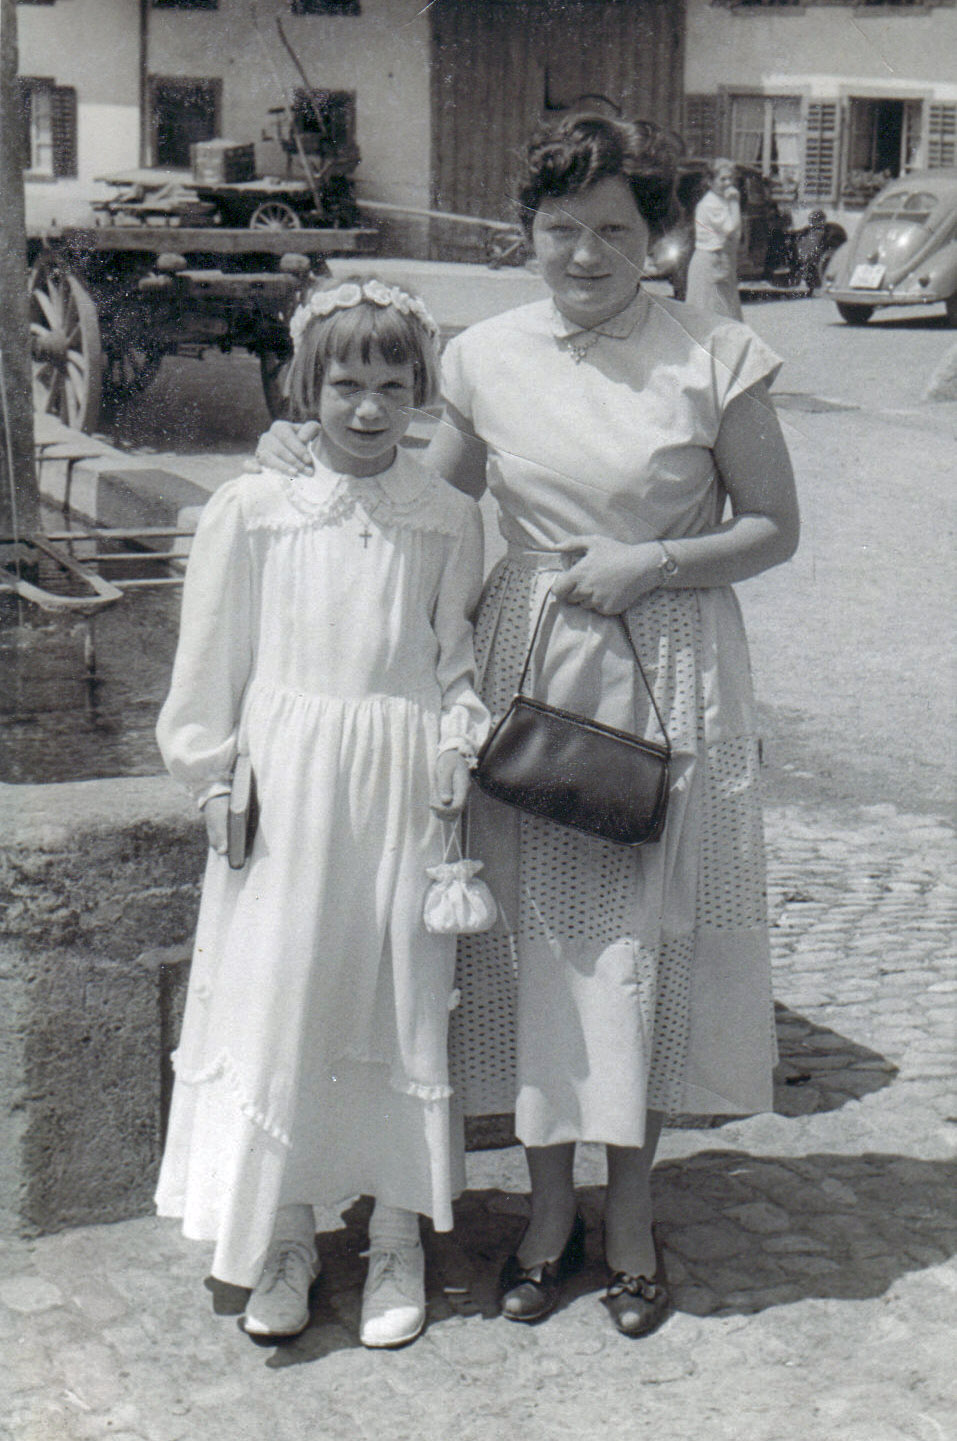 Low Sunday 1953. My mom with her little sister Katharina.